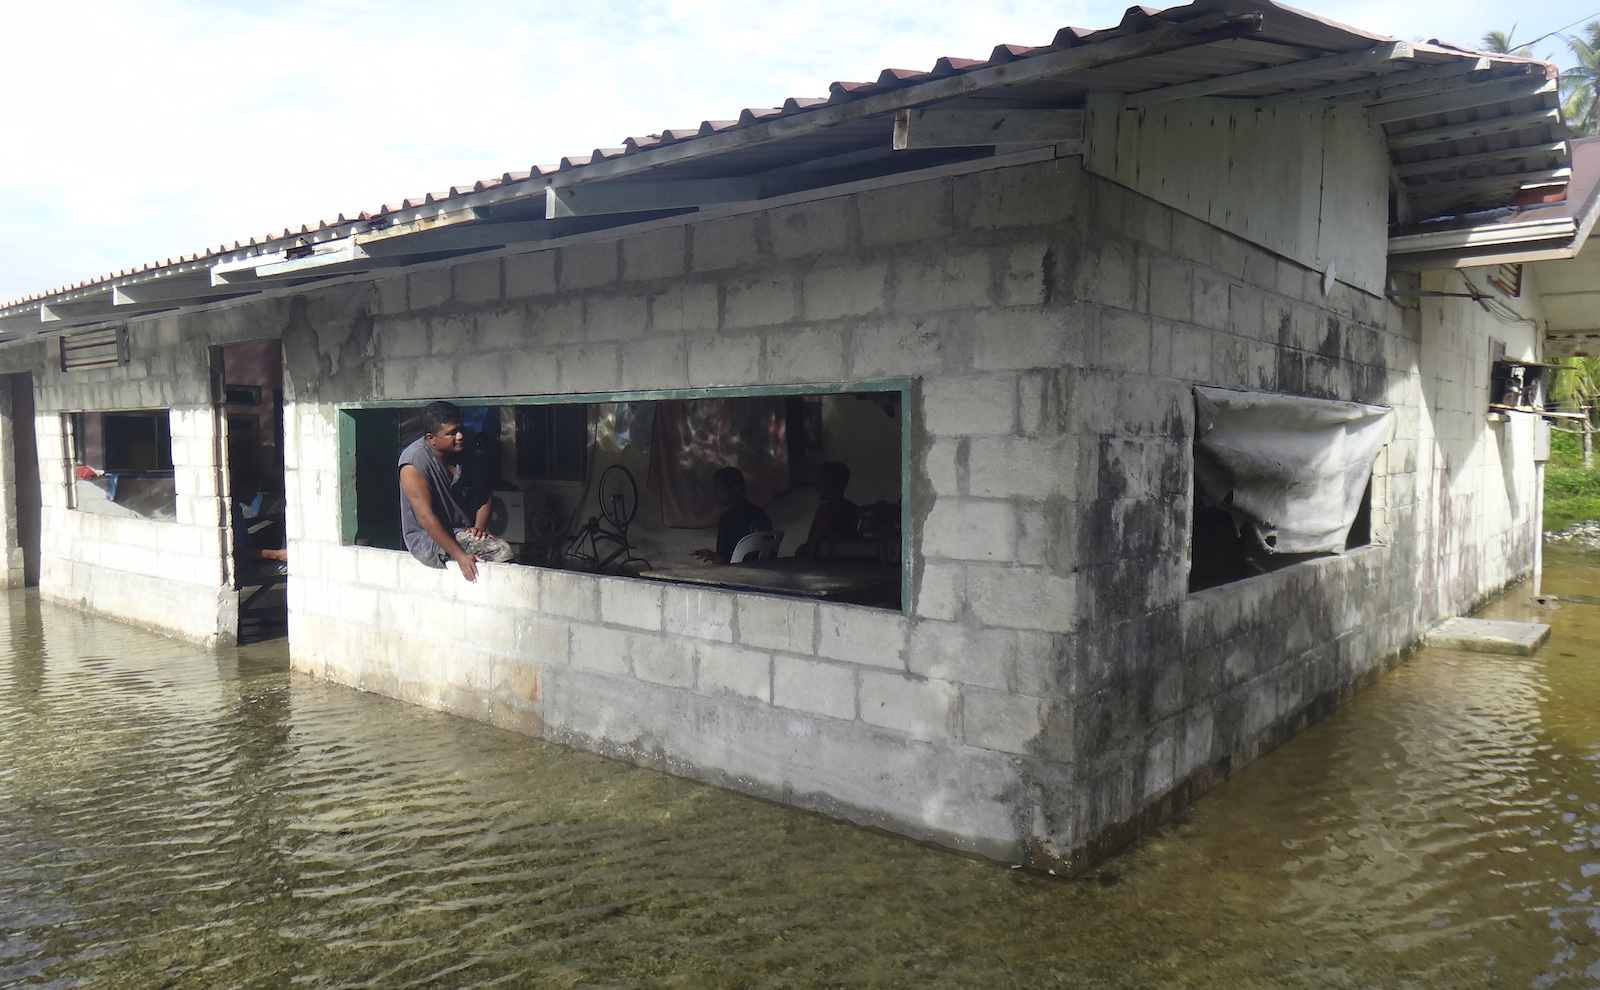 A man sits in the window of a cinderblock home with flood waters all around